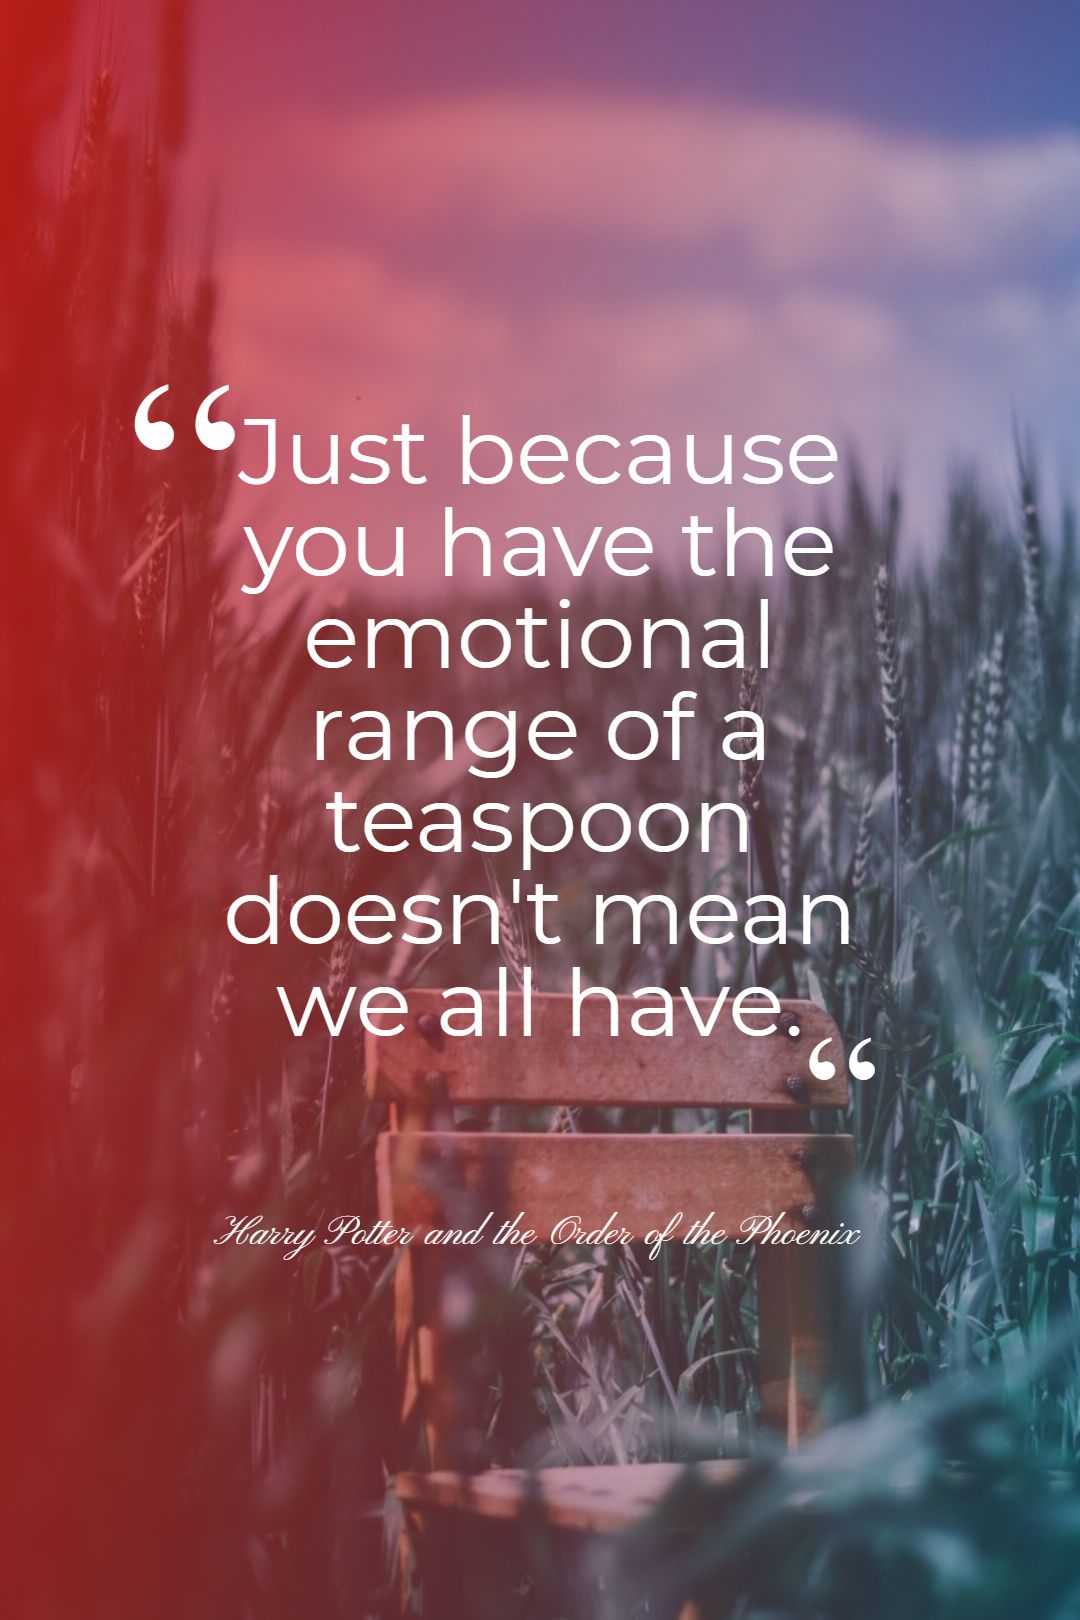 Just because you have the emotional range of a teaspoon doesnt mean we all have.